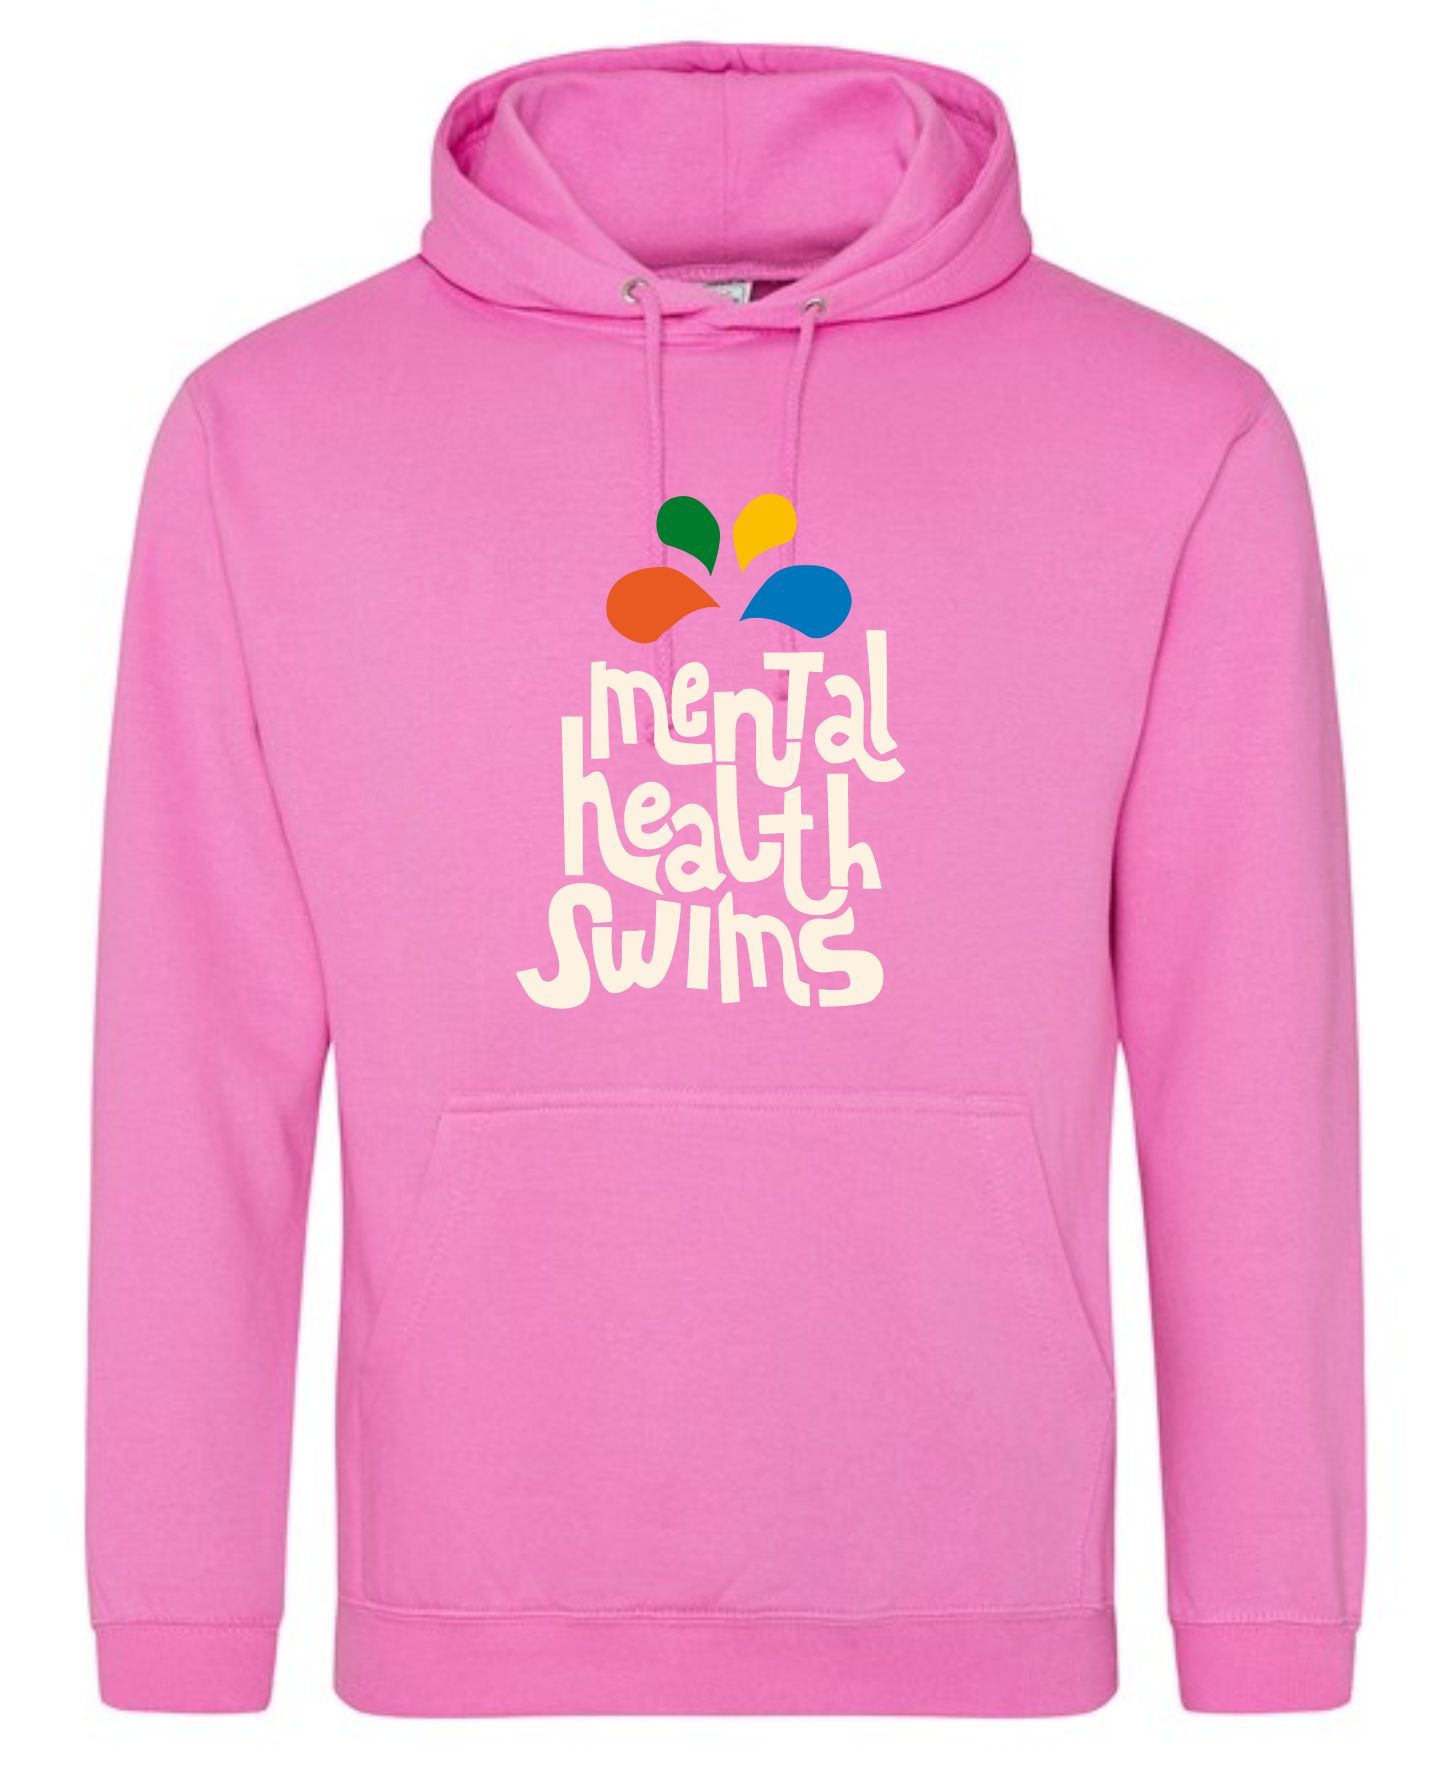 Mental Health Swims- 'Front logo with splashes' Candyfloss Pink Hoodie (Unisex)